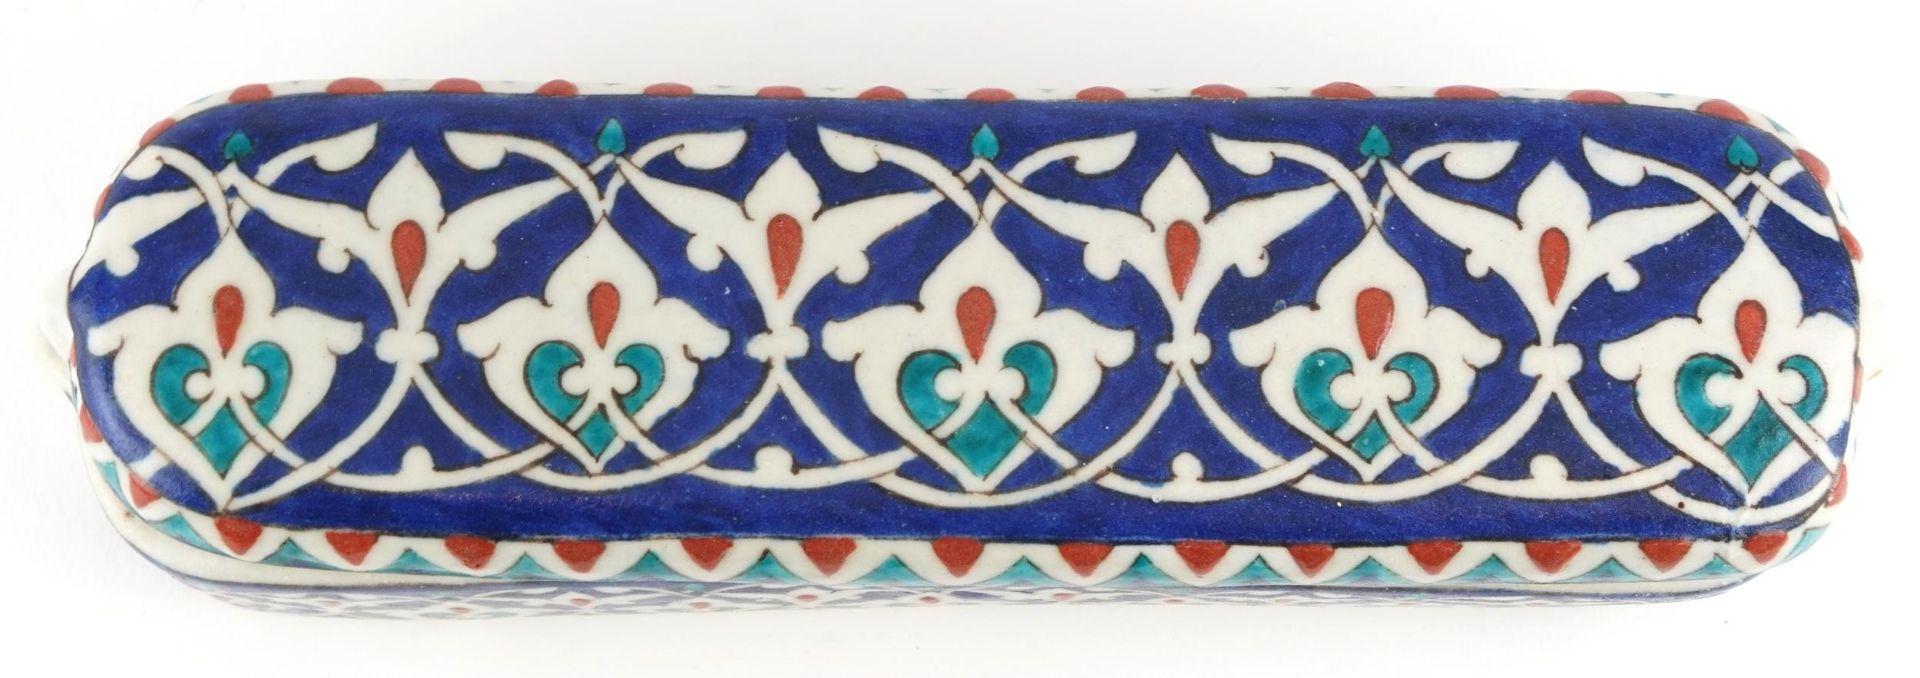 Turkish Iznik pottery pen box and cover, 23.5cm in length - Image 7 of 10